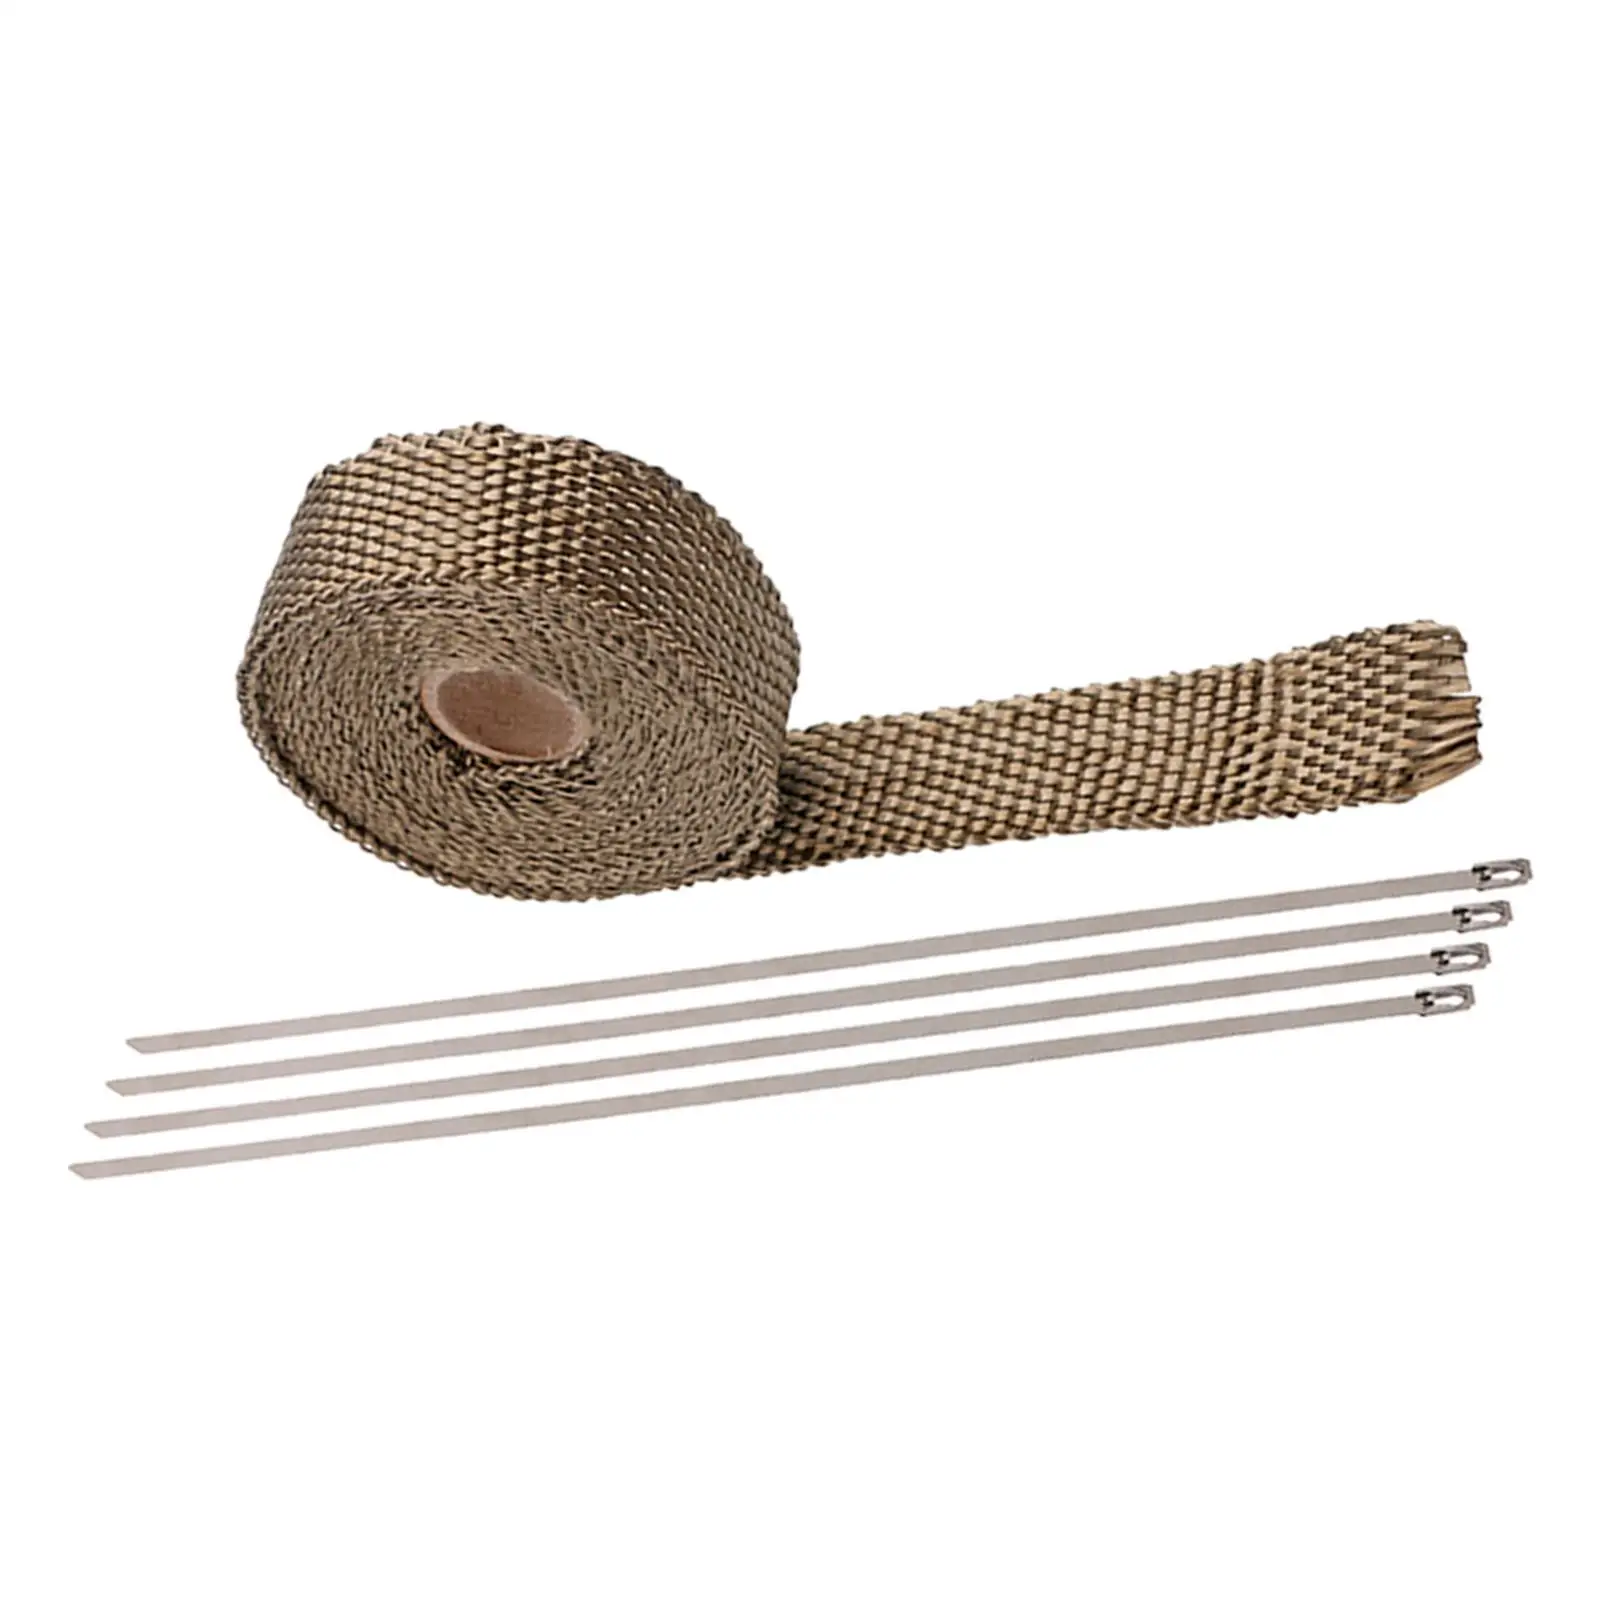 Multipurpose Exhaust Pipe Heat Wrap 16ft Replaces Heat Resistant Cloth with 4Pcs Ties